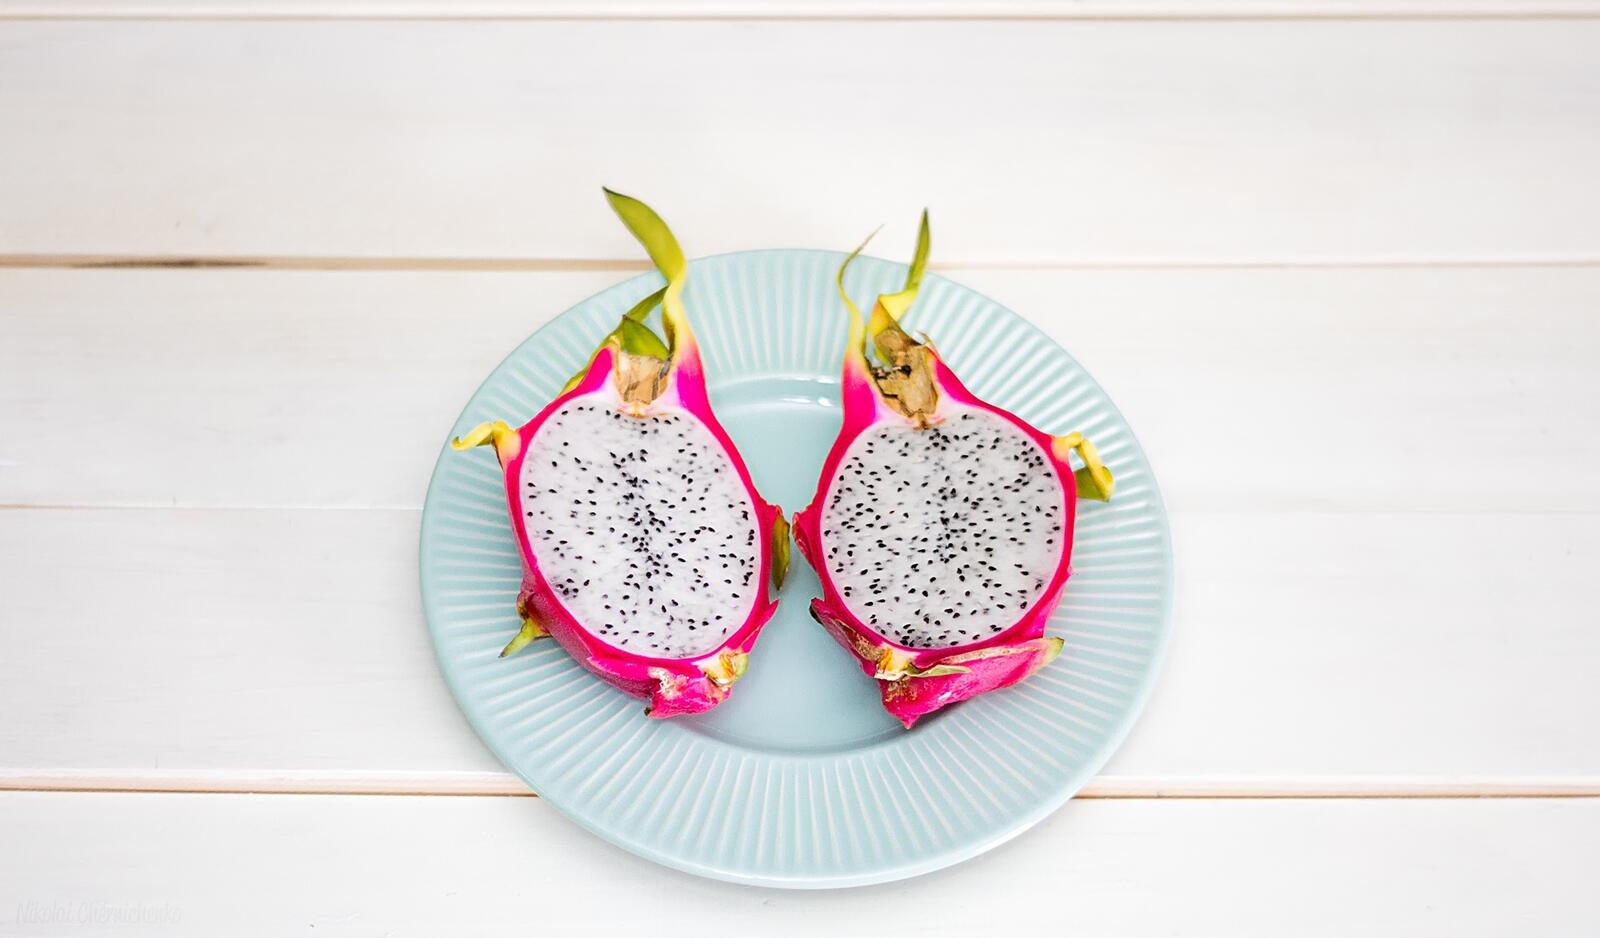 Wallpapers pitahaya cutted fruits on the desktop